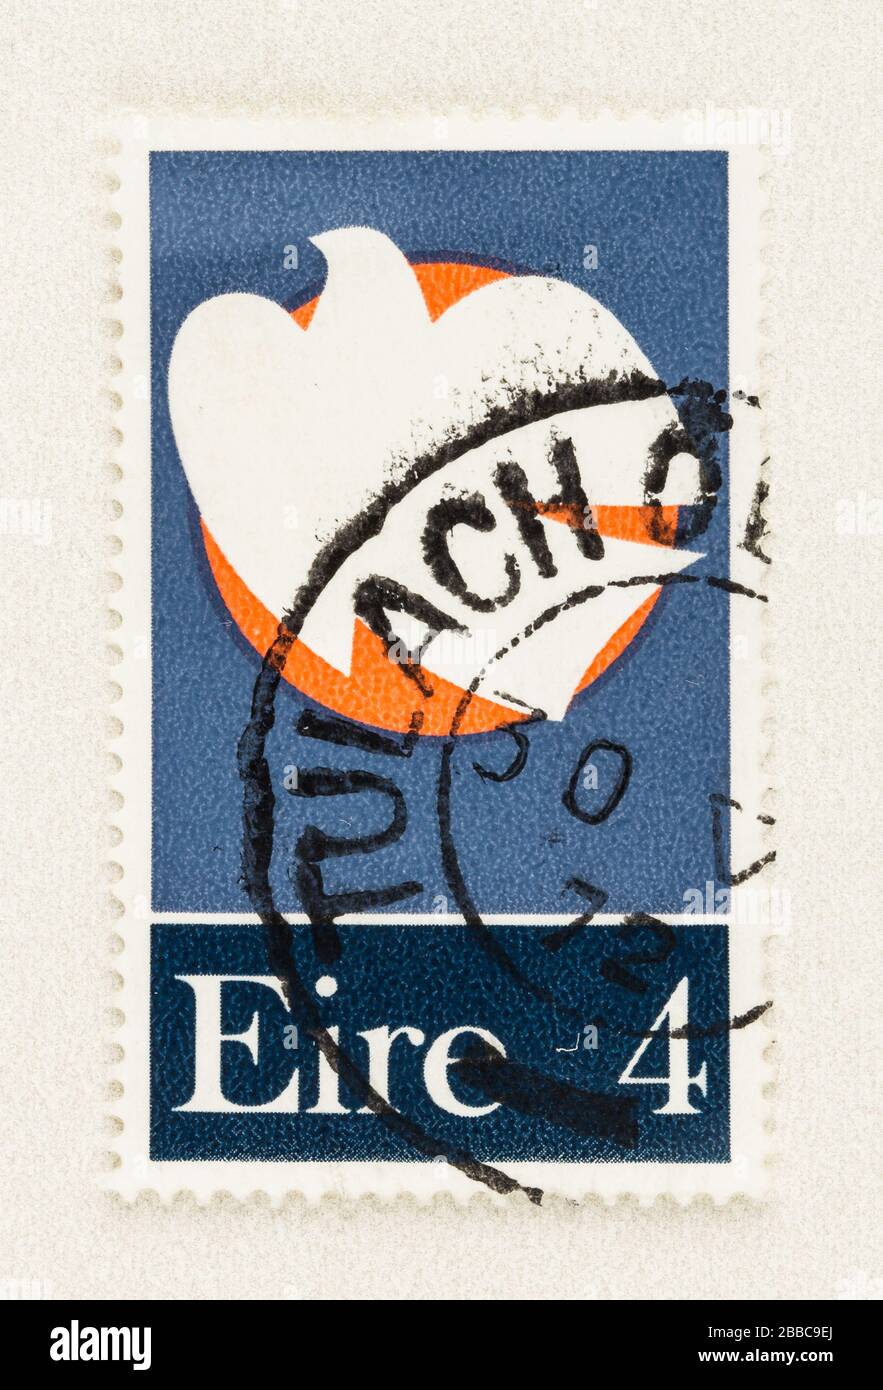 SEATTLE WASHINGTON - March 29, 2020: Close up of Ireland postage stamp featuring dove soaring past the rising moon, issued in 1972. Stock Photo